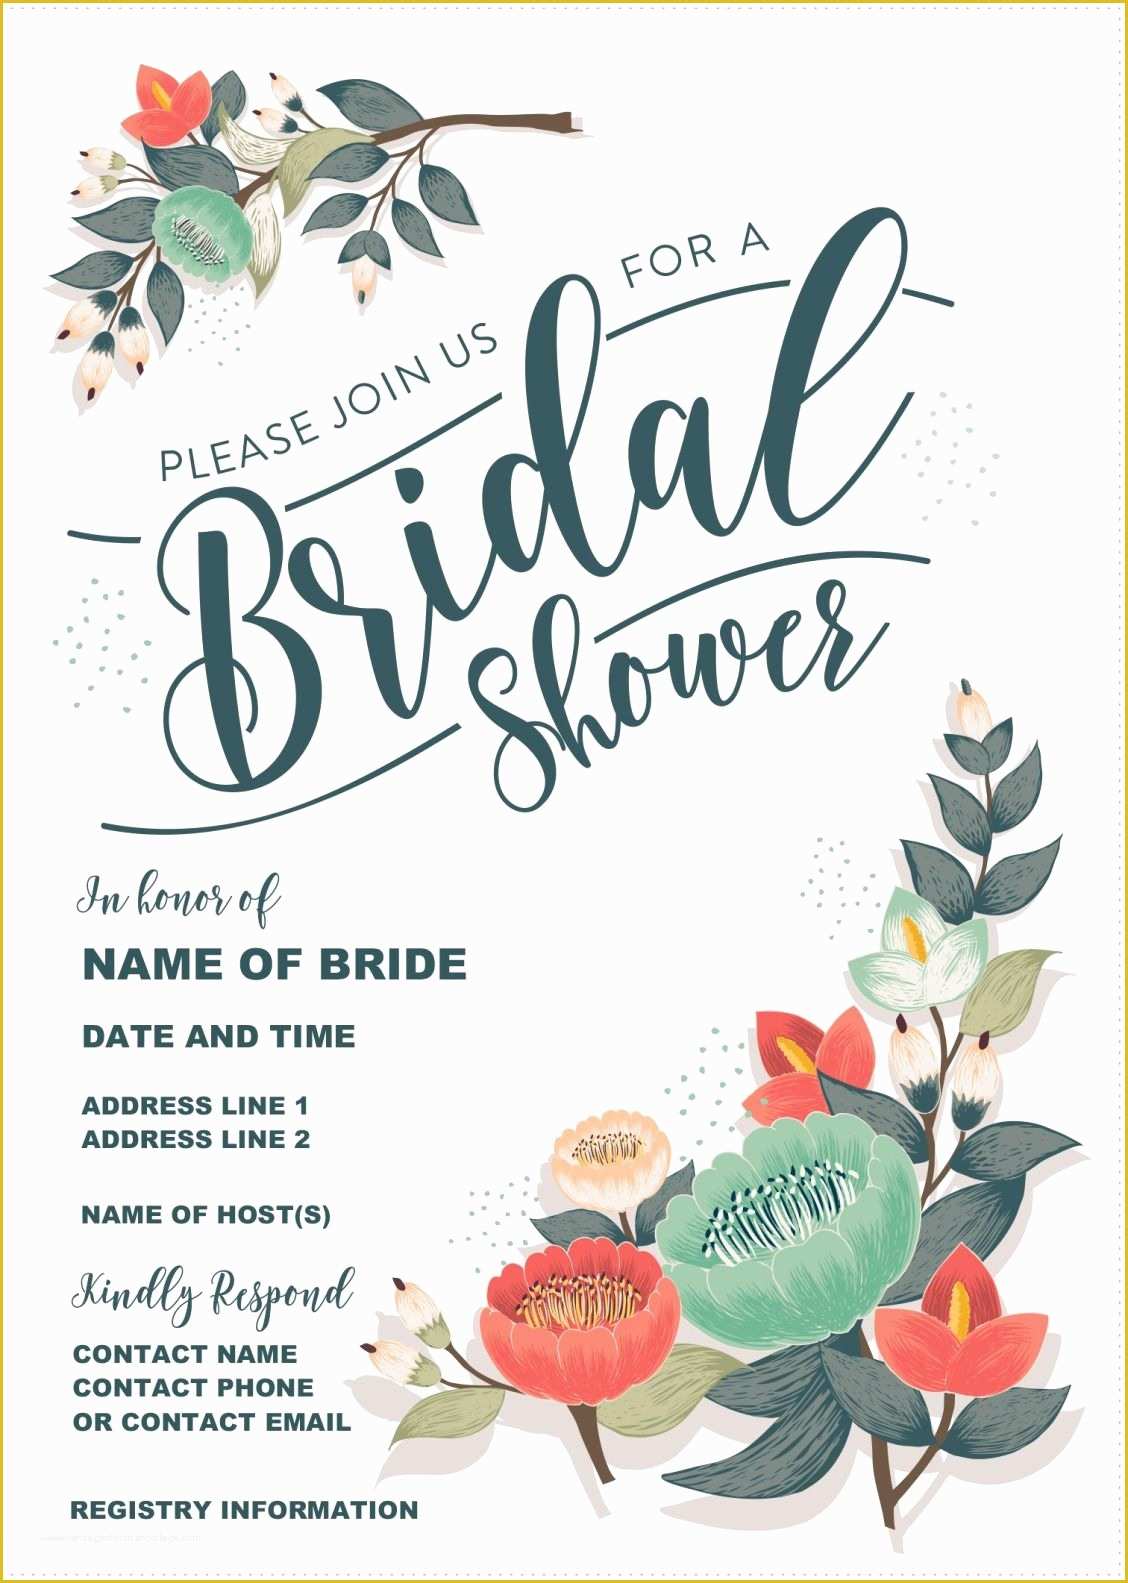 Free Bridal Shower Invitation Templates Of Our Gorgeous Printable Bridal Shower Invitation is totally